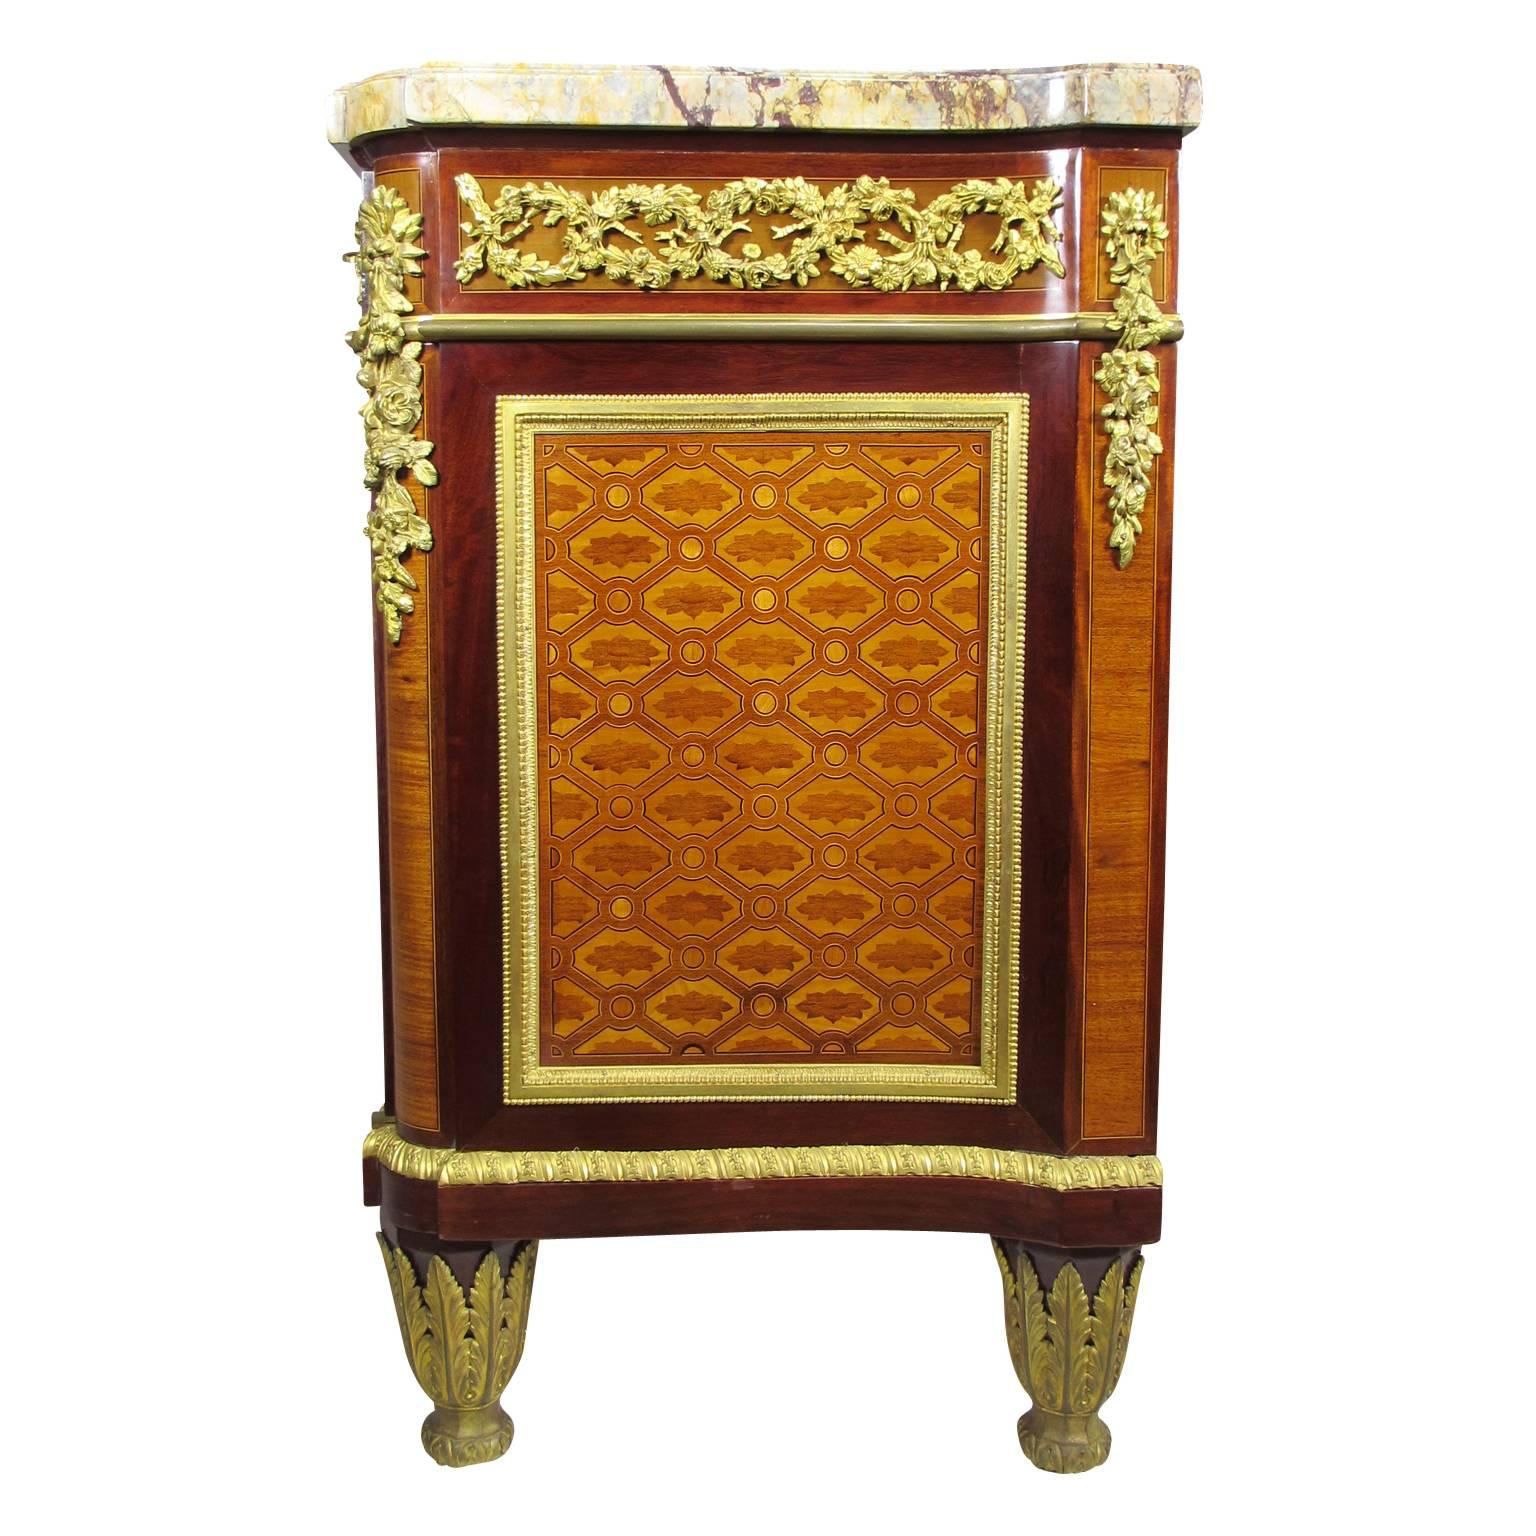 Carved Fine French 19th Century Louis XVI Style Gilt-Bronze Mounted Marquetry Commode For Sale